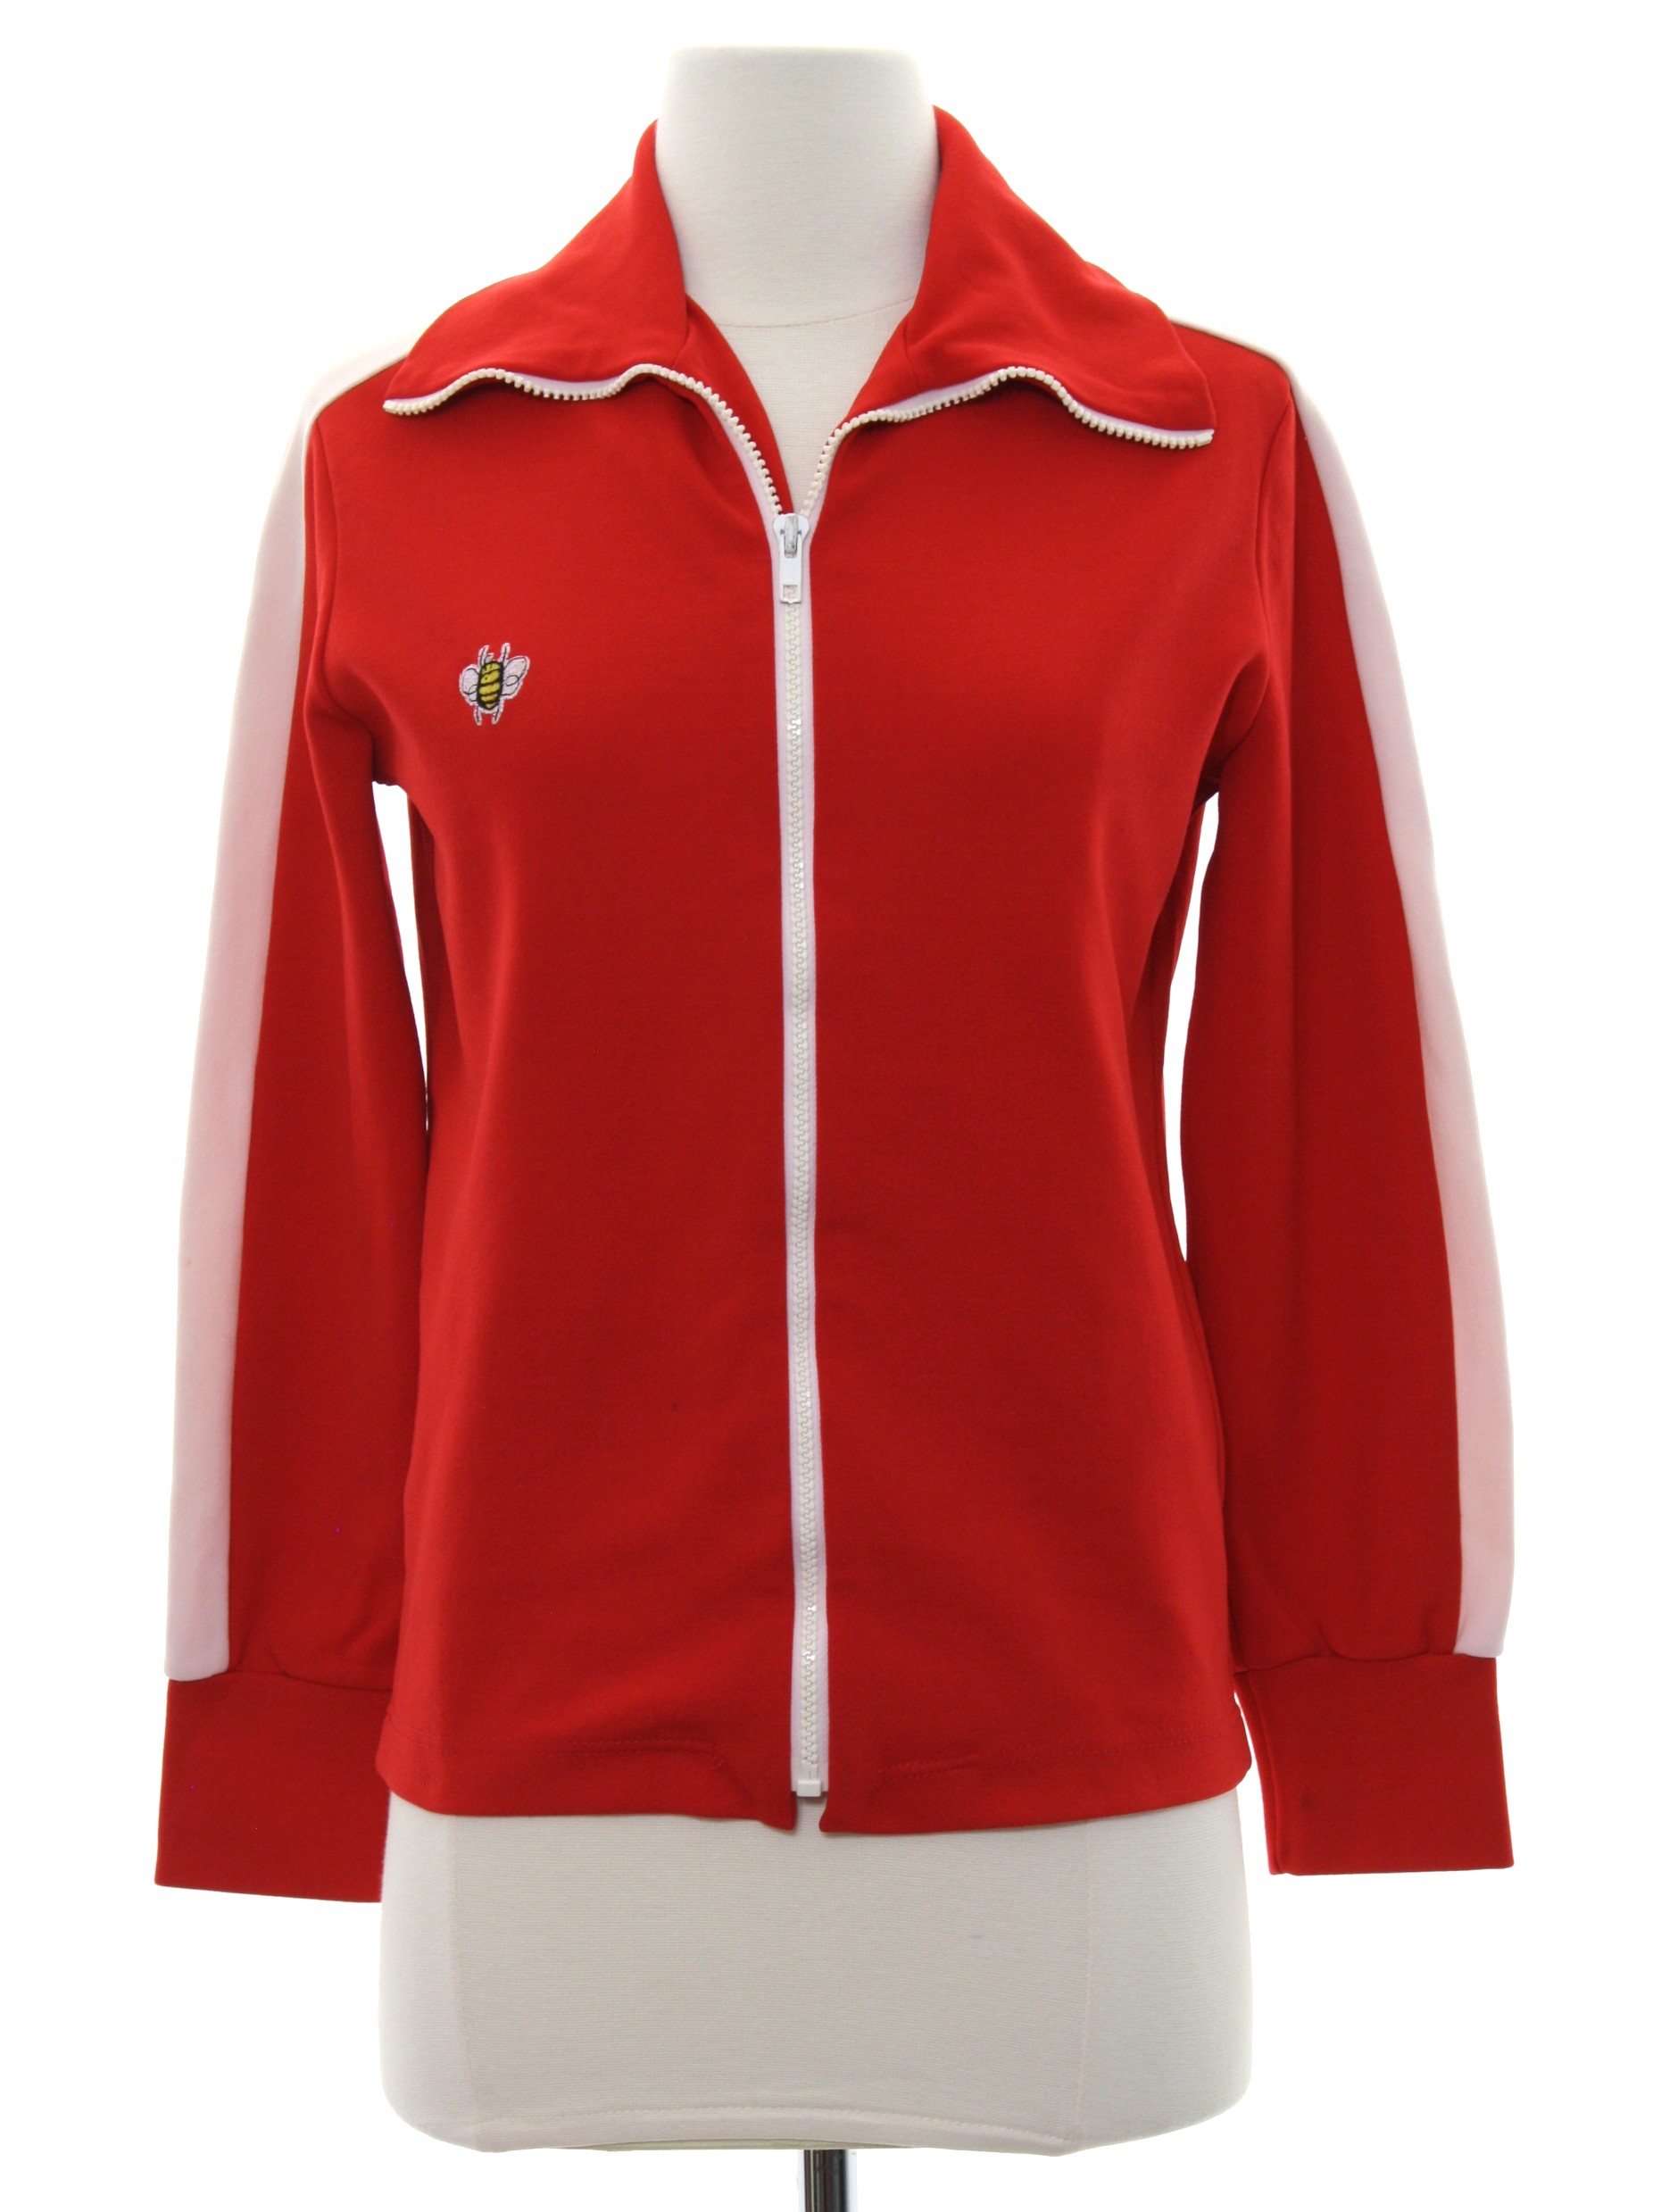 on track the 70\'s -No jogging Vintage chest or Jacket: Label- an Womens sleeves, Stripes jacket. Label zip 70s white down red the nylon bee and embroidered longsleeve No design front right